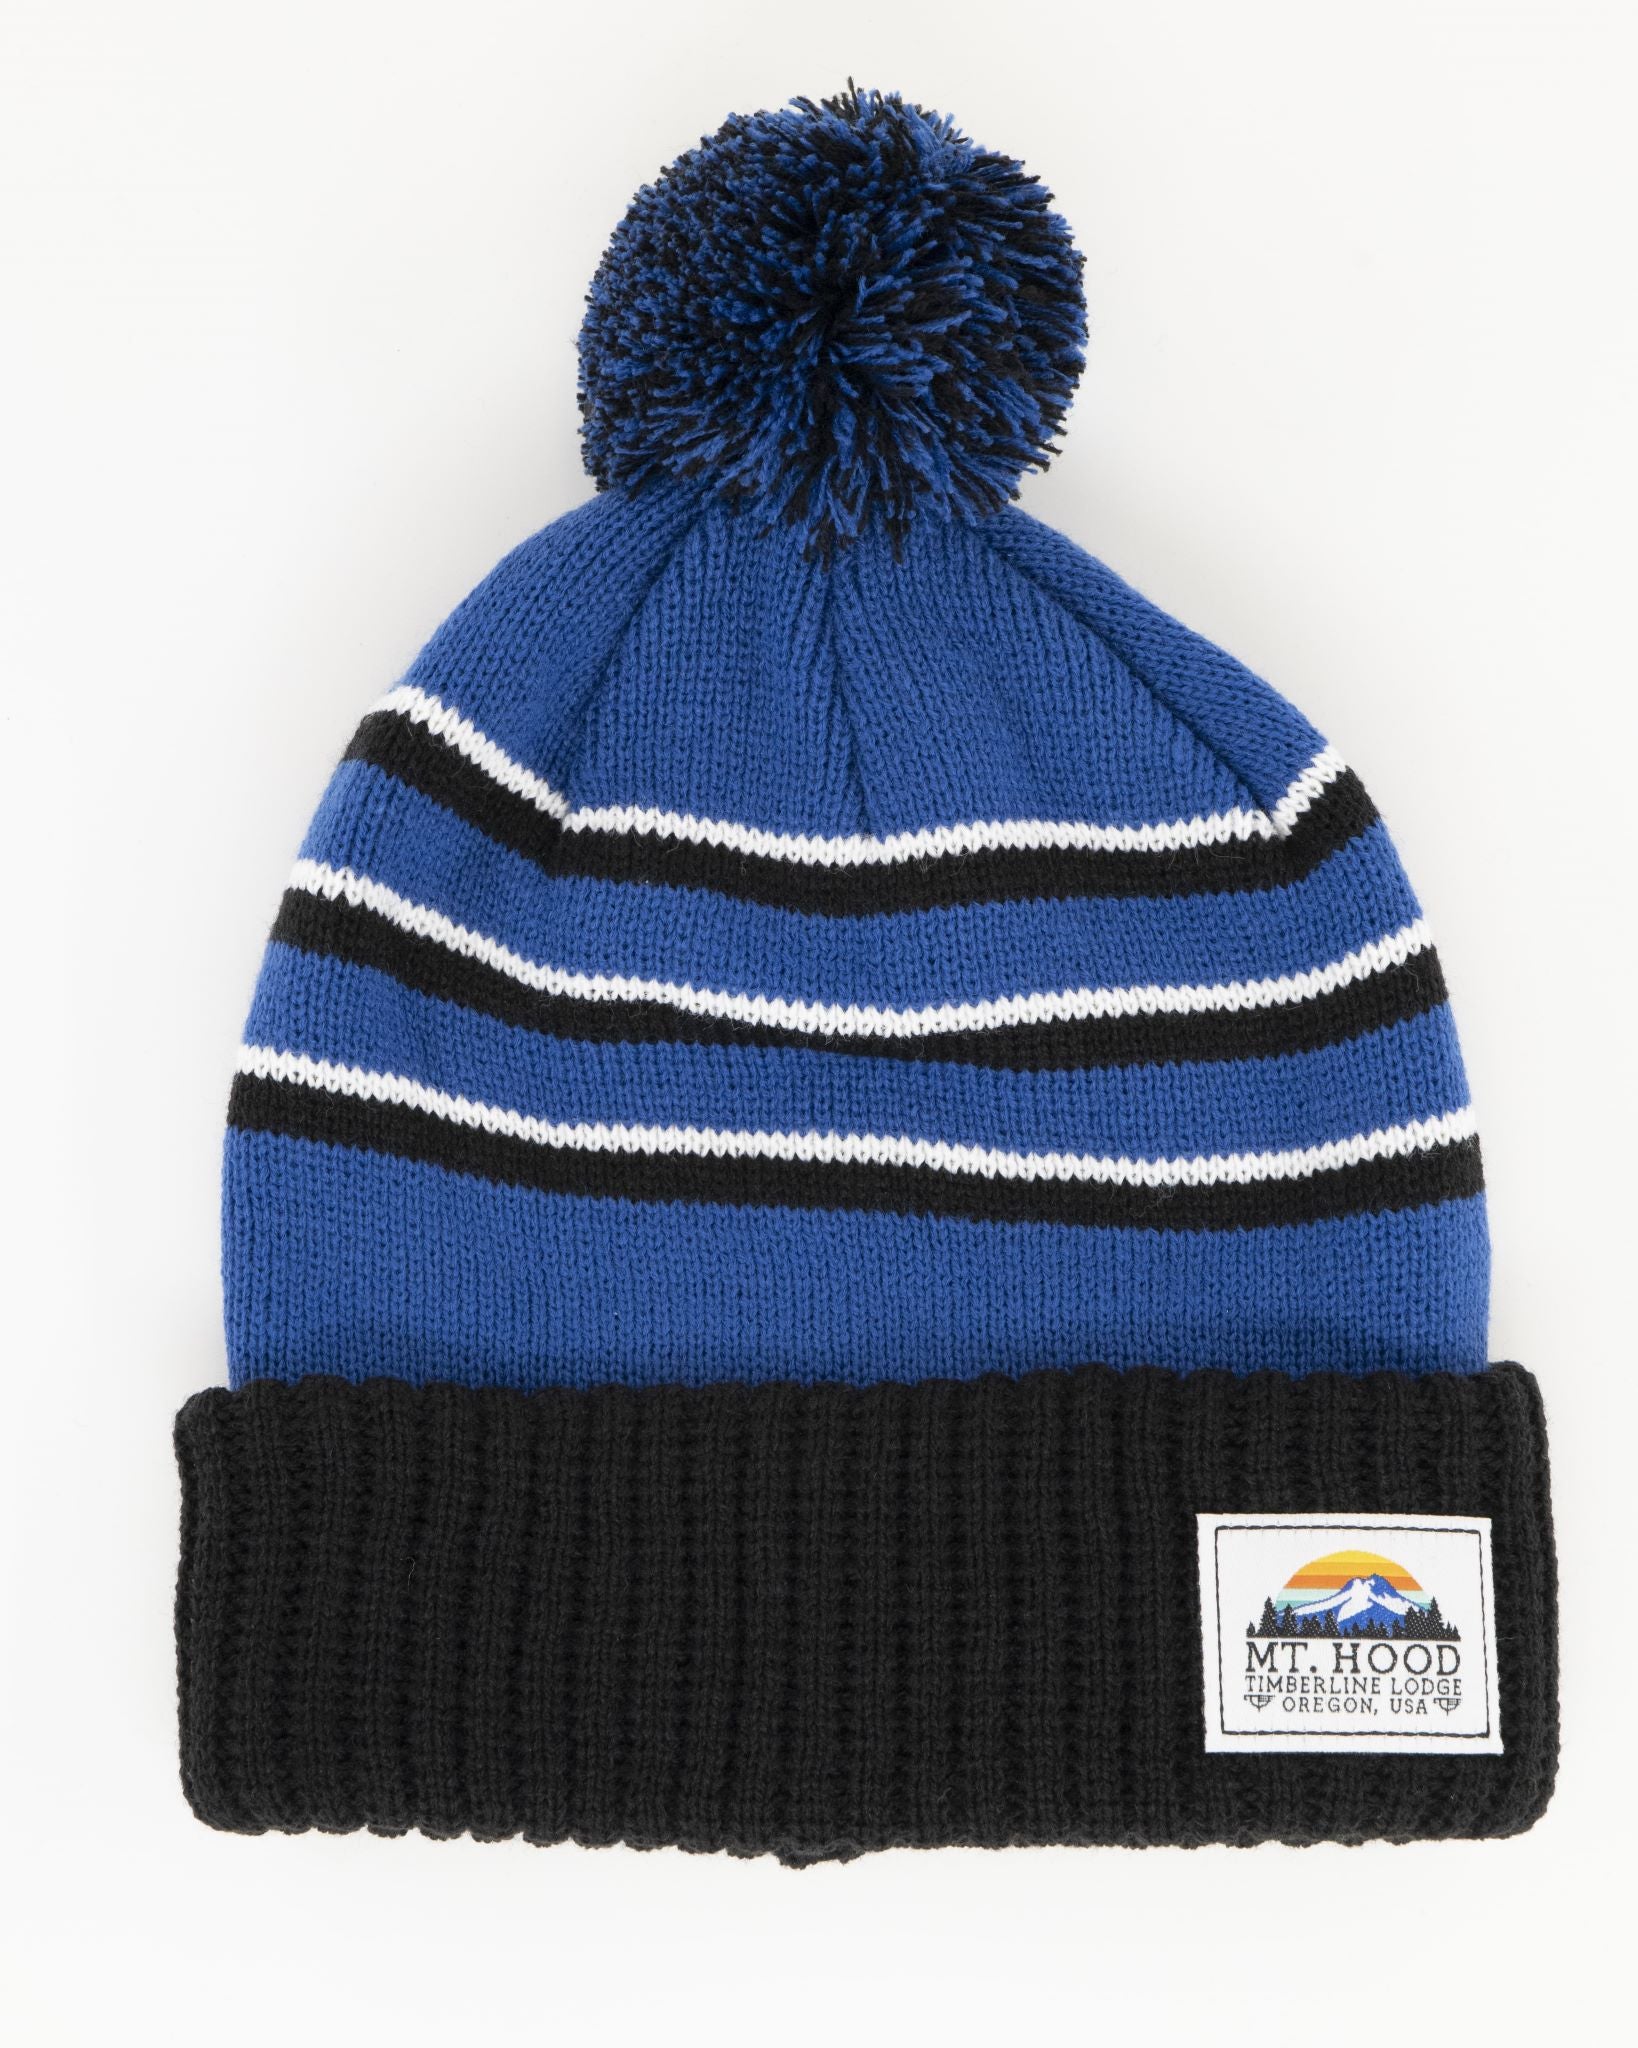 B Online Blue, Black, Grey, or Pom - and - in Store Beanie Timberline Daybreak Available - White Lodge